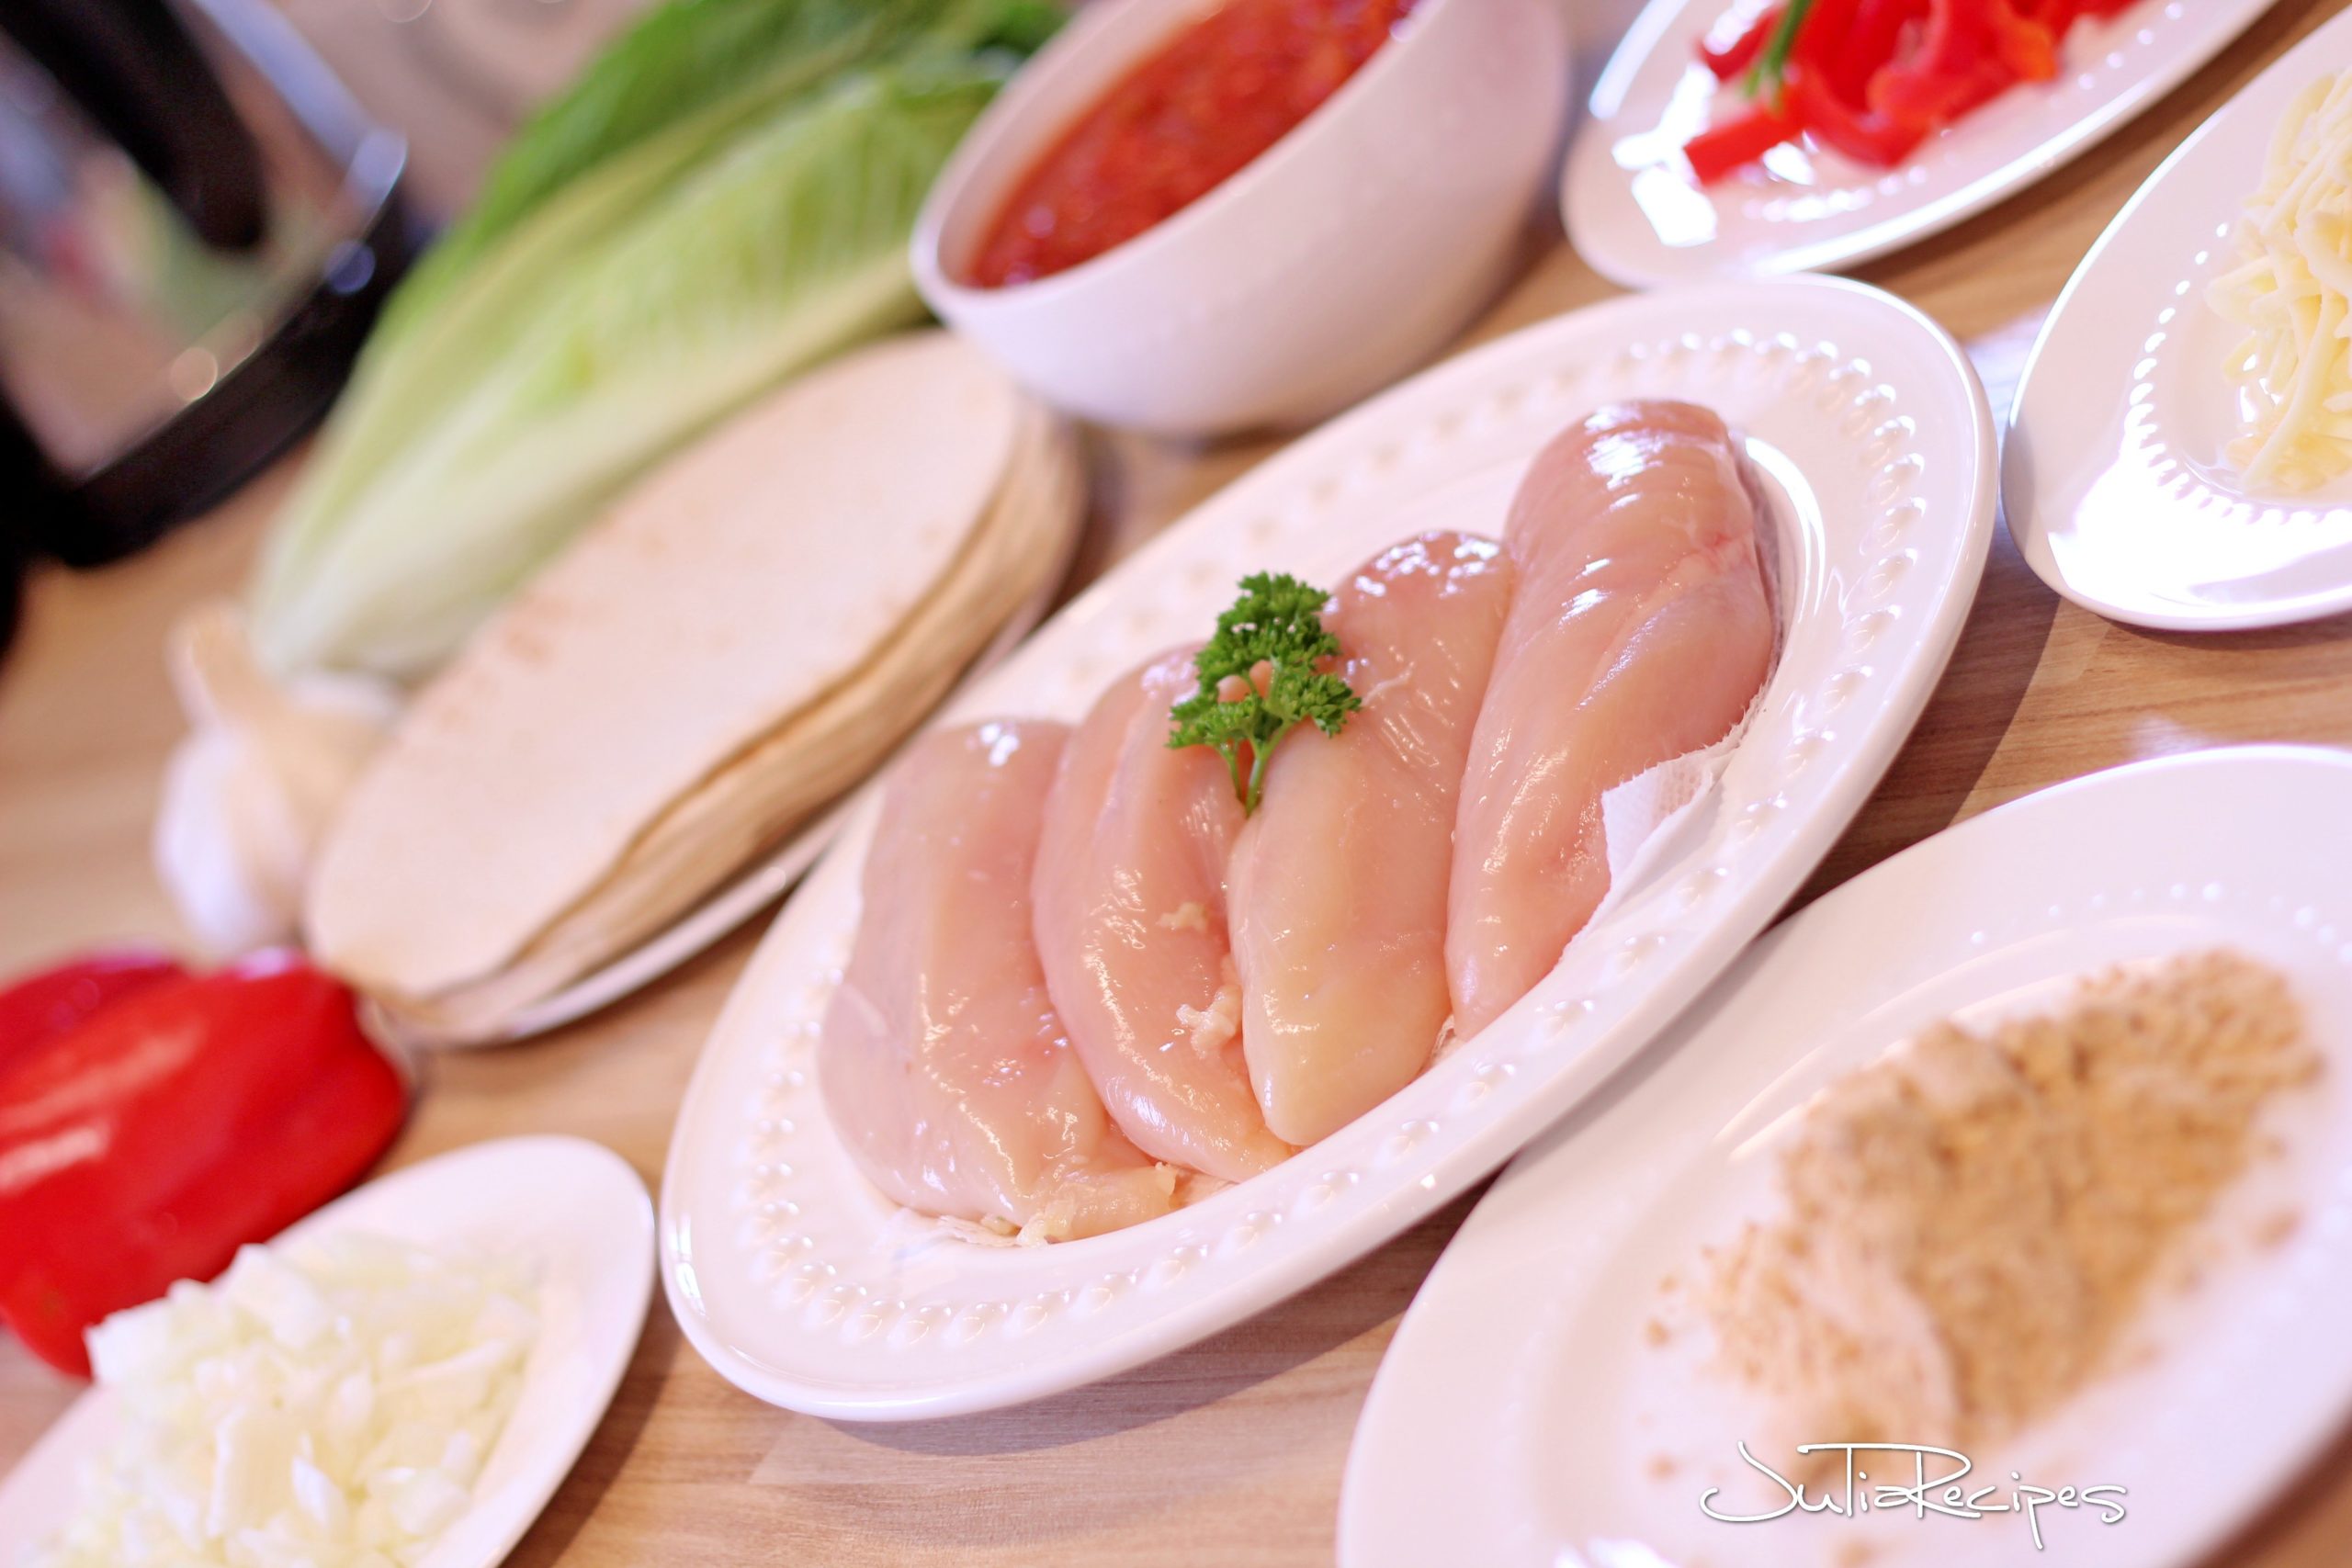 Chicken breasts as ingredient for mexican fajitas with tortillas and salsa.